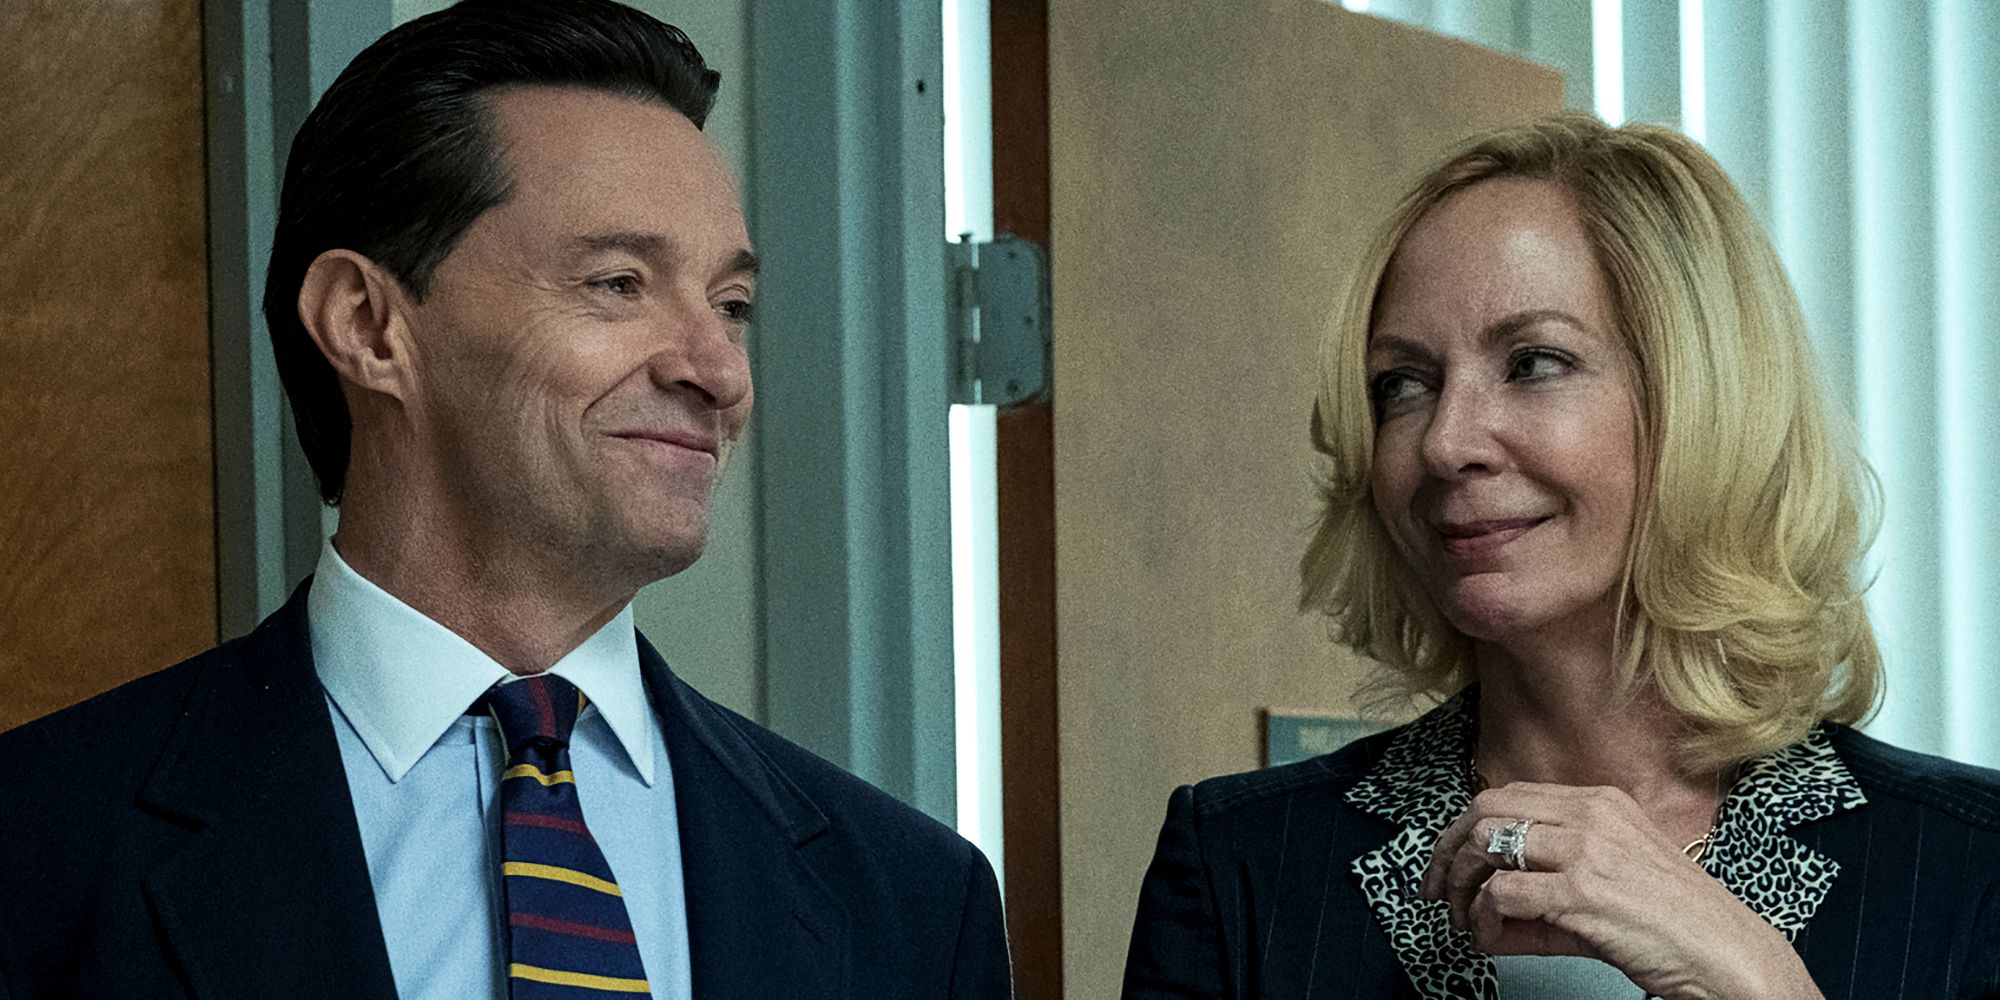 Hugh Jackman and Allison Janney smile at each other in Bad Education